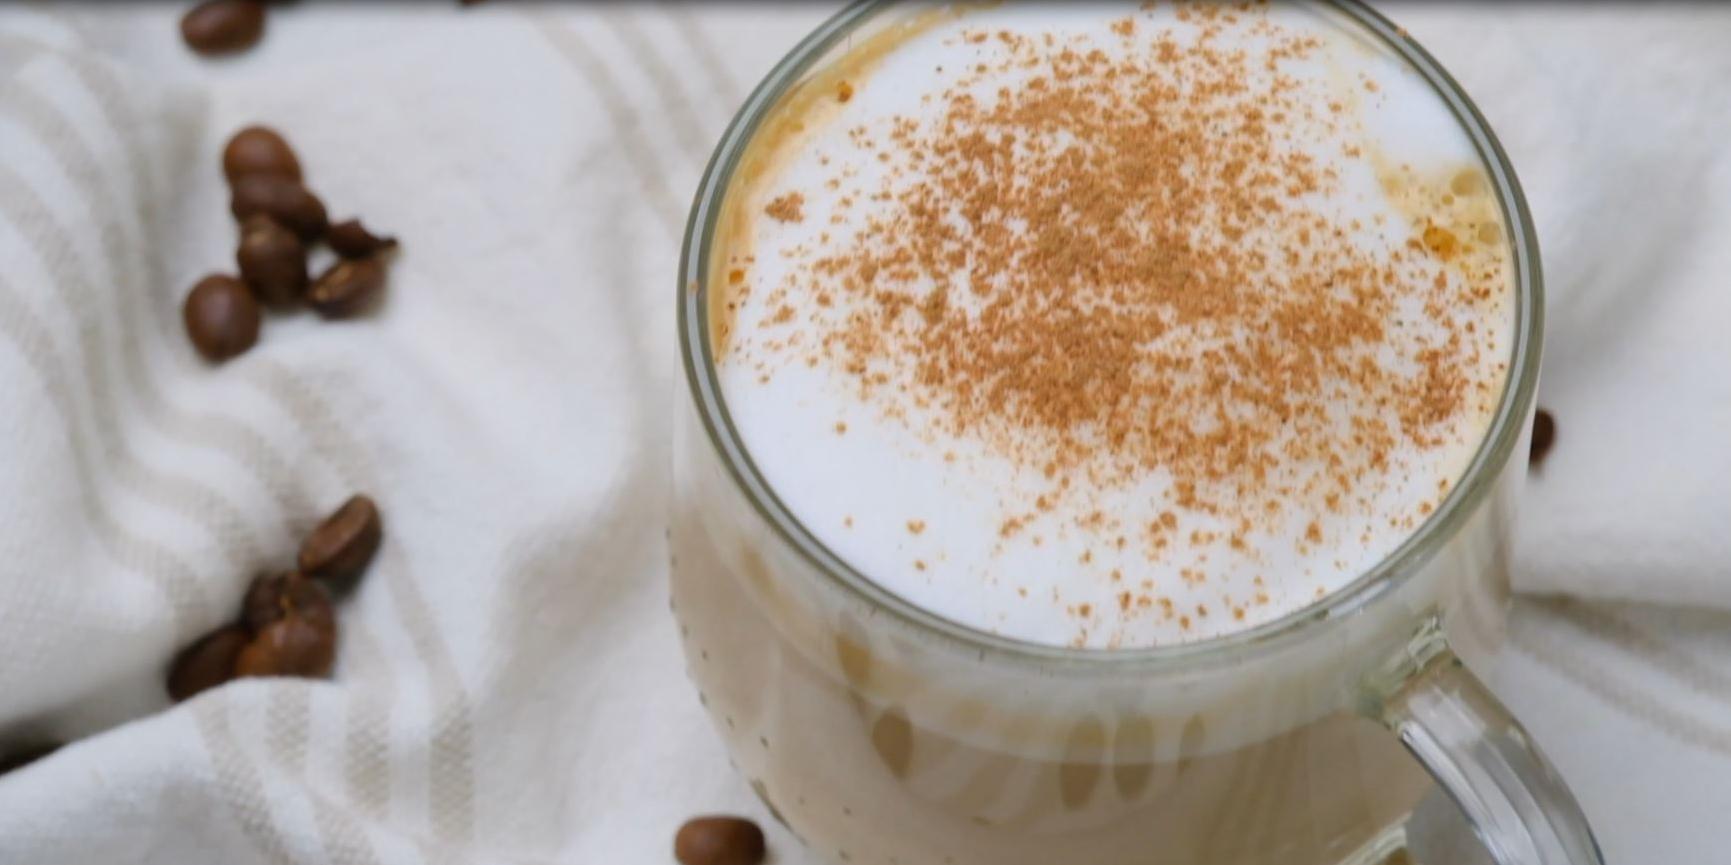  A warm and cozy French vanilla cappuccino, perfect for a relaxing afternoon